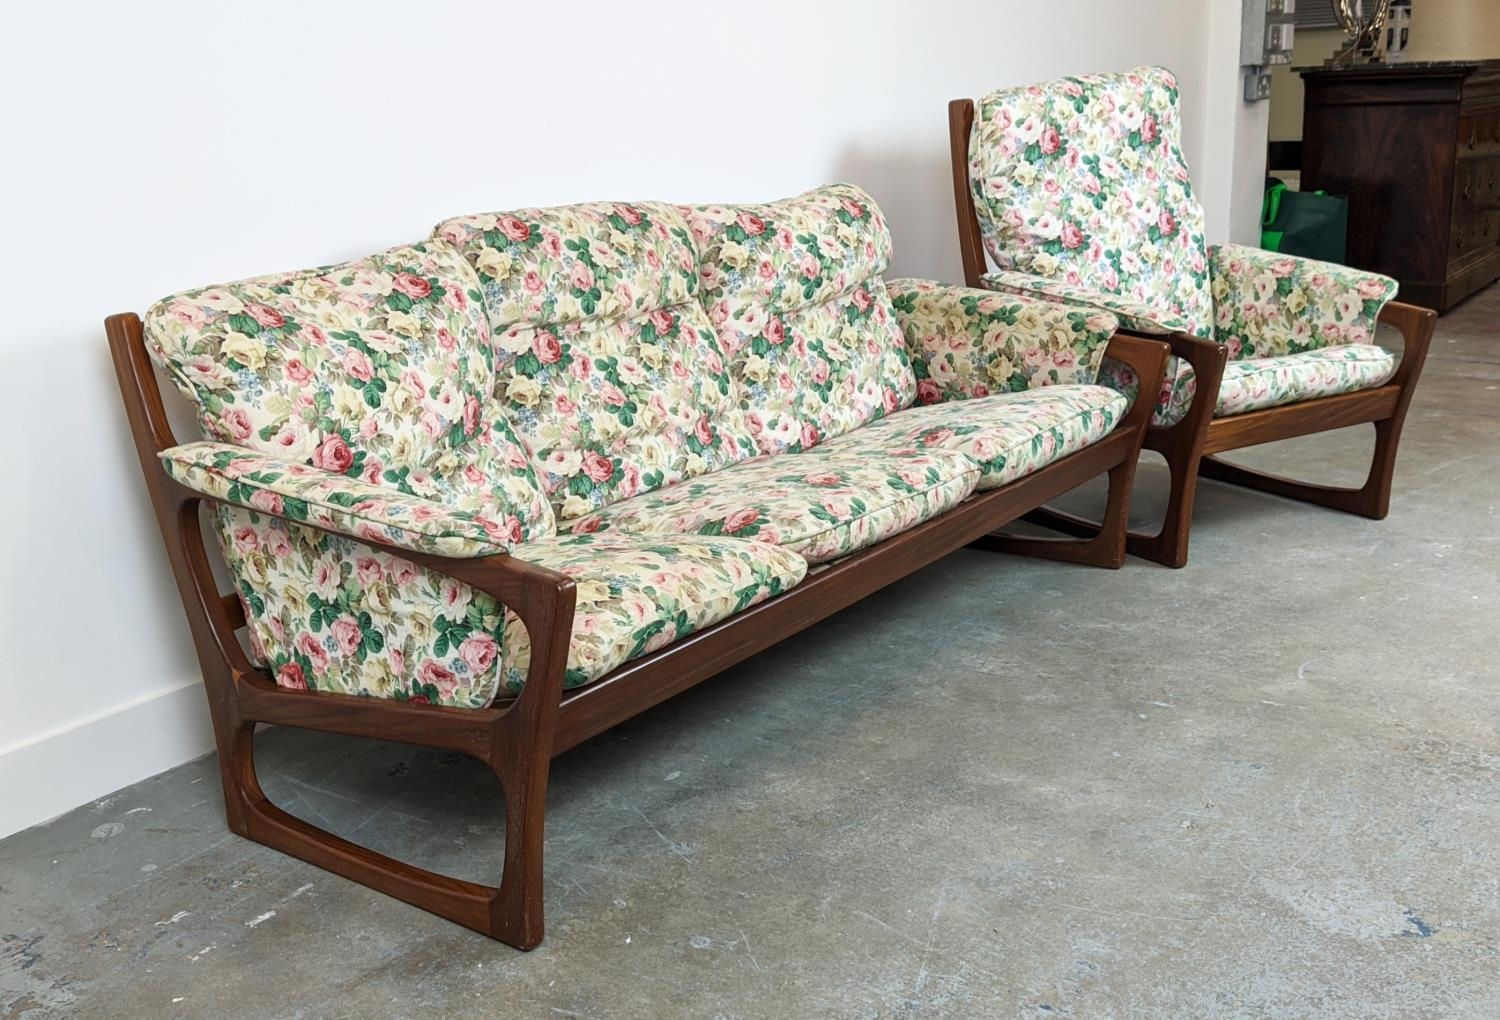 SOFA, circa 1970, Danish teak with floral cushions, 75cm H x 185cm x 76cm and a pair of matching - Image 4 of 10